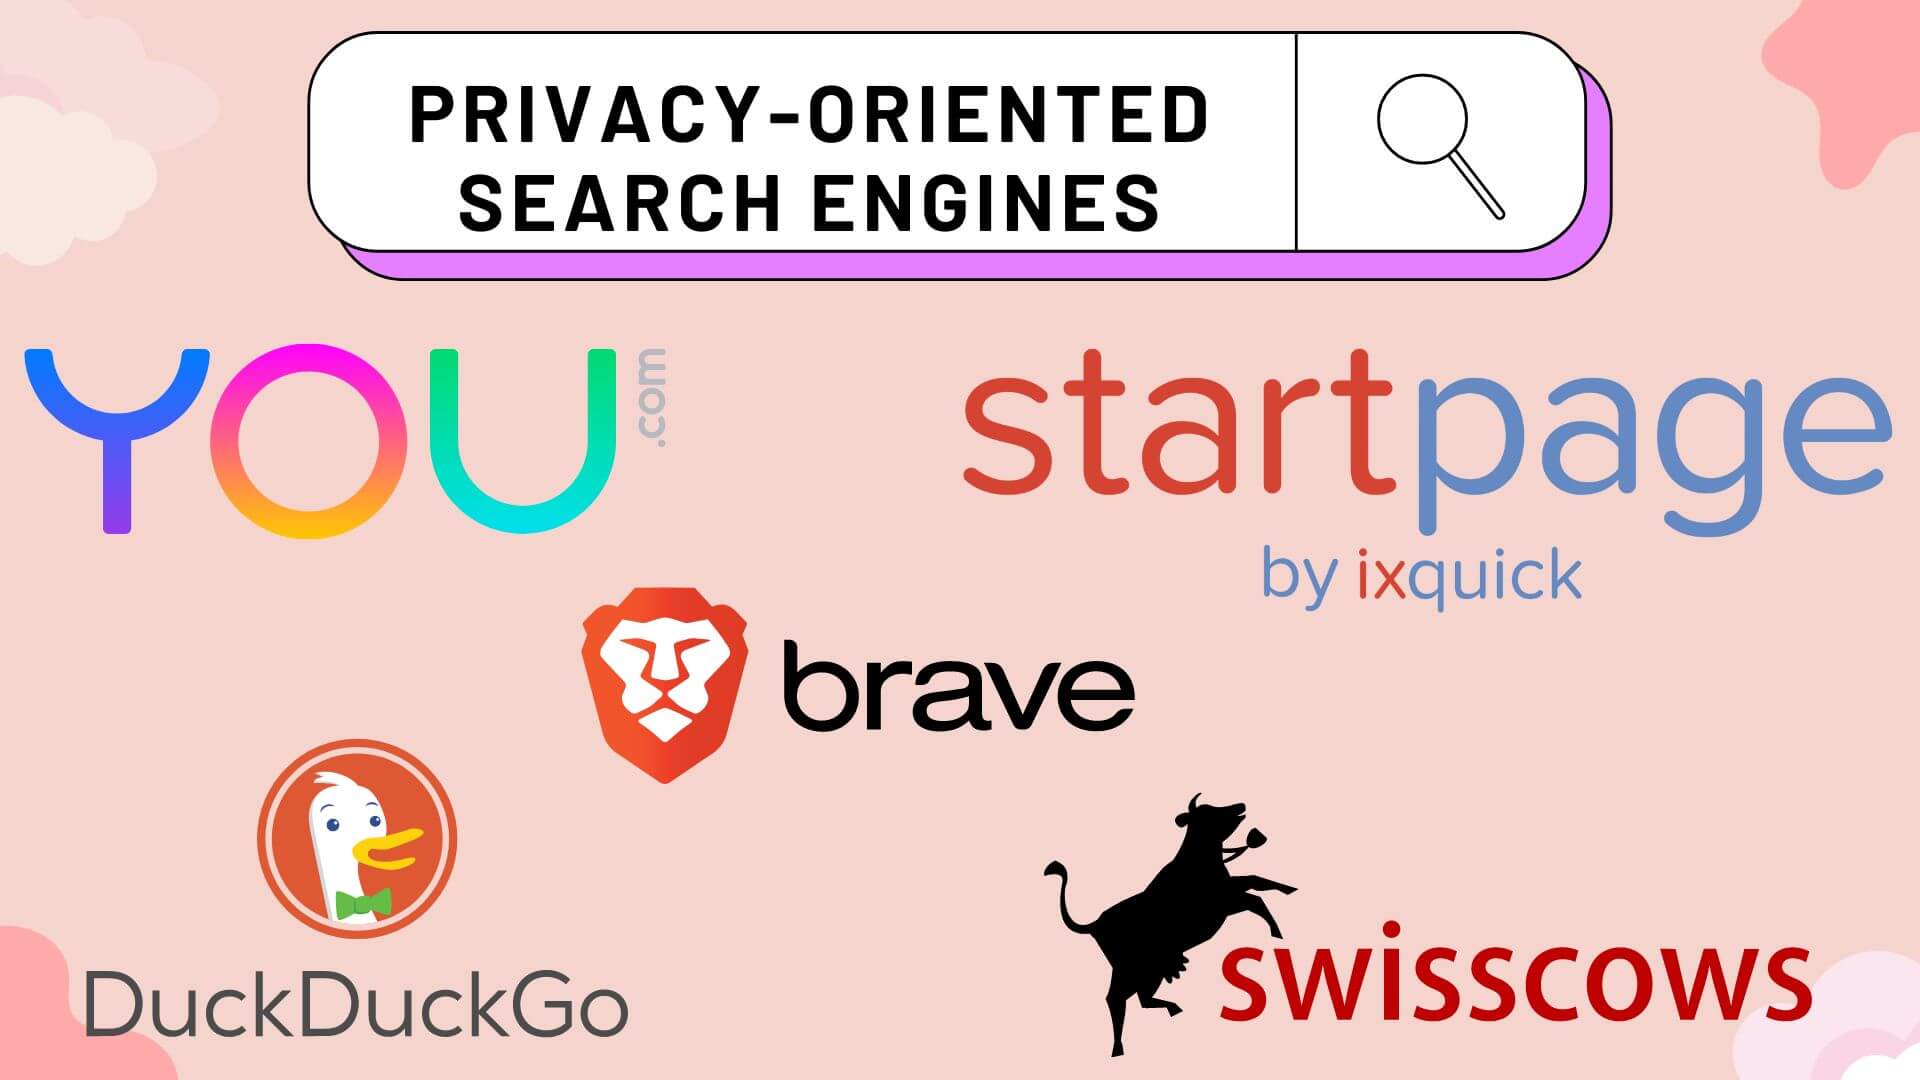 creative Showing best search engine for privacy include DuckDuckGo, Startpage, Swisscows, Brave Search, You.